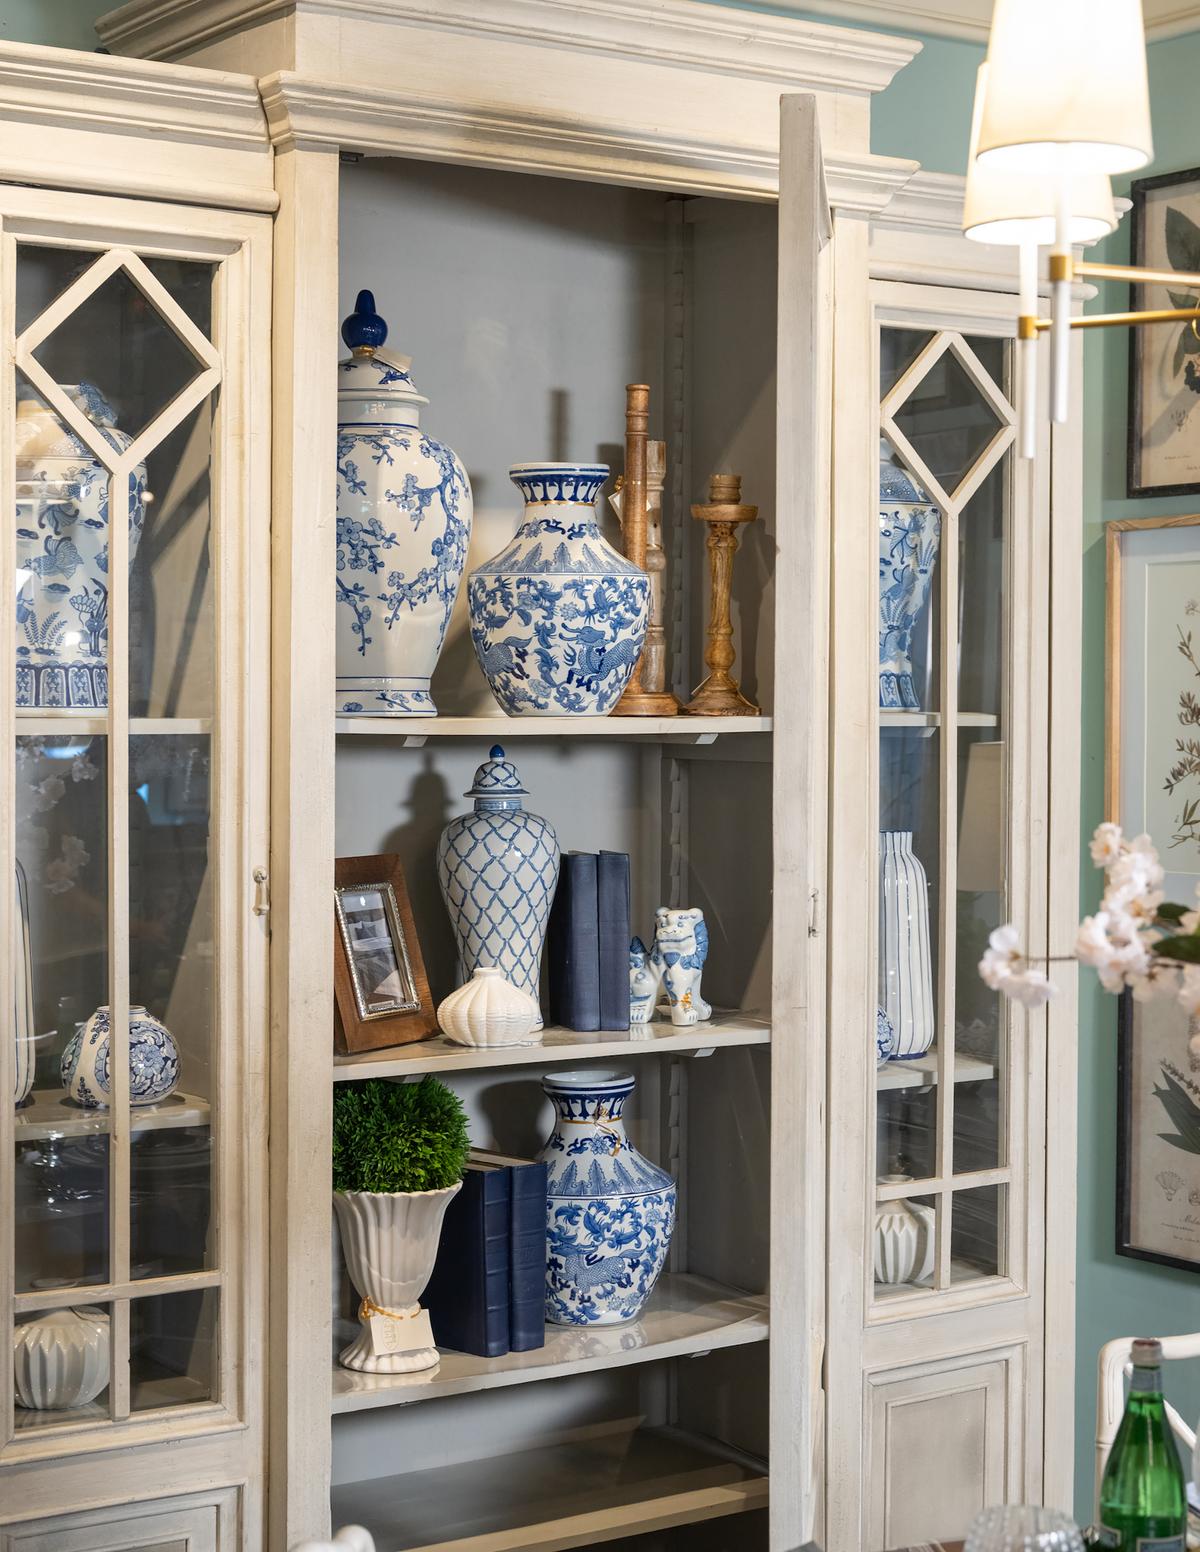 An etagere designed to exude a formal aesthetic, boasting glass shelves and brass finishings, complemented by an acrylic bar handle. (Handout/TNS)